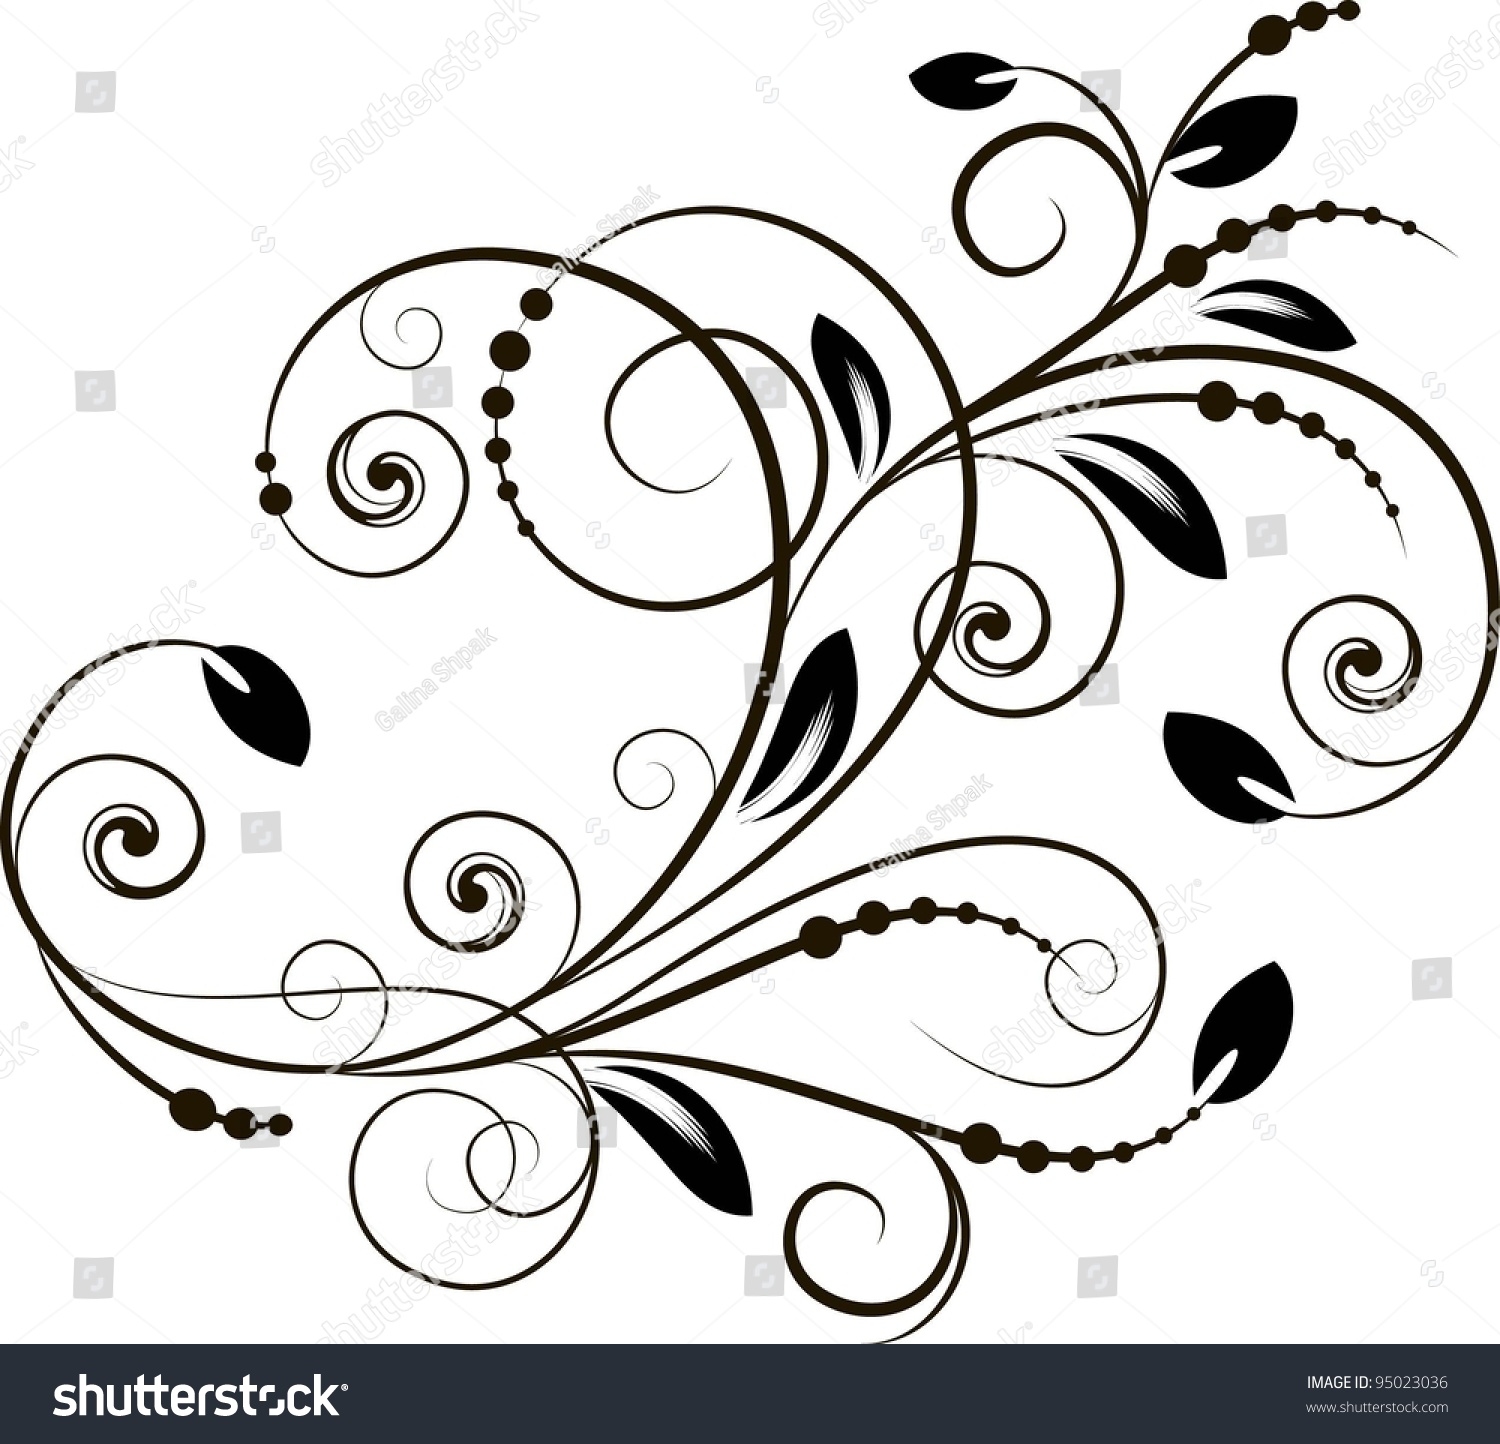 Decorative Branch In Vintage Styled For Design Stock Vector